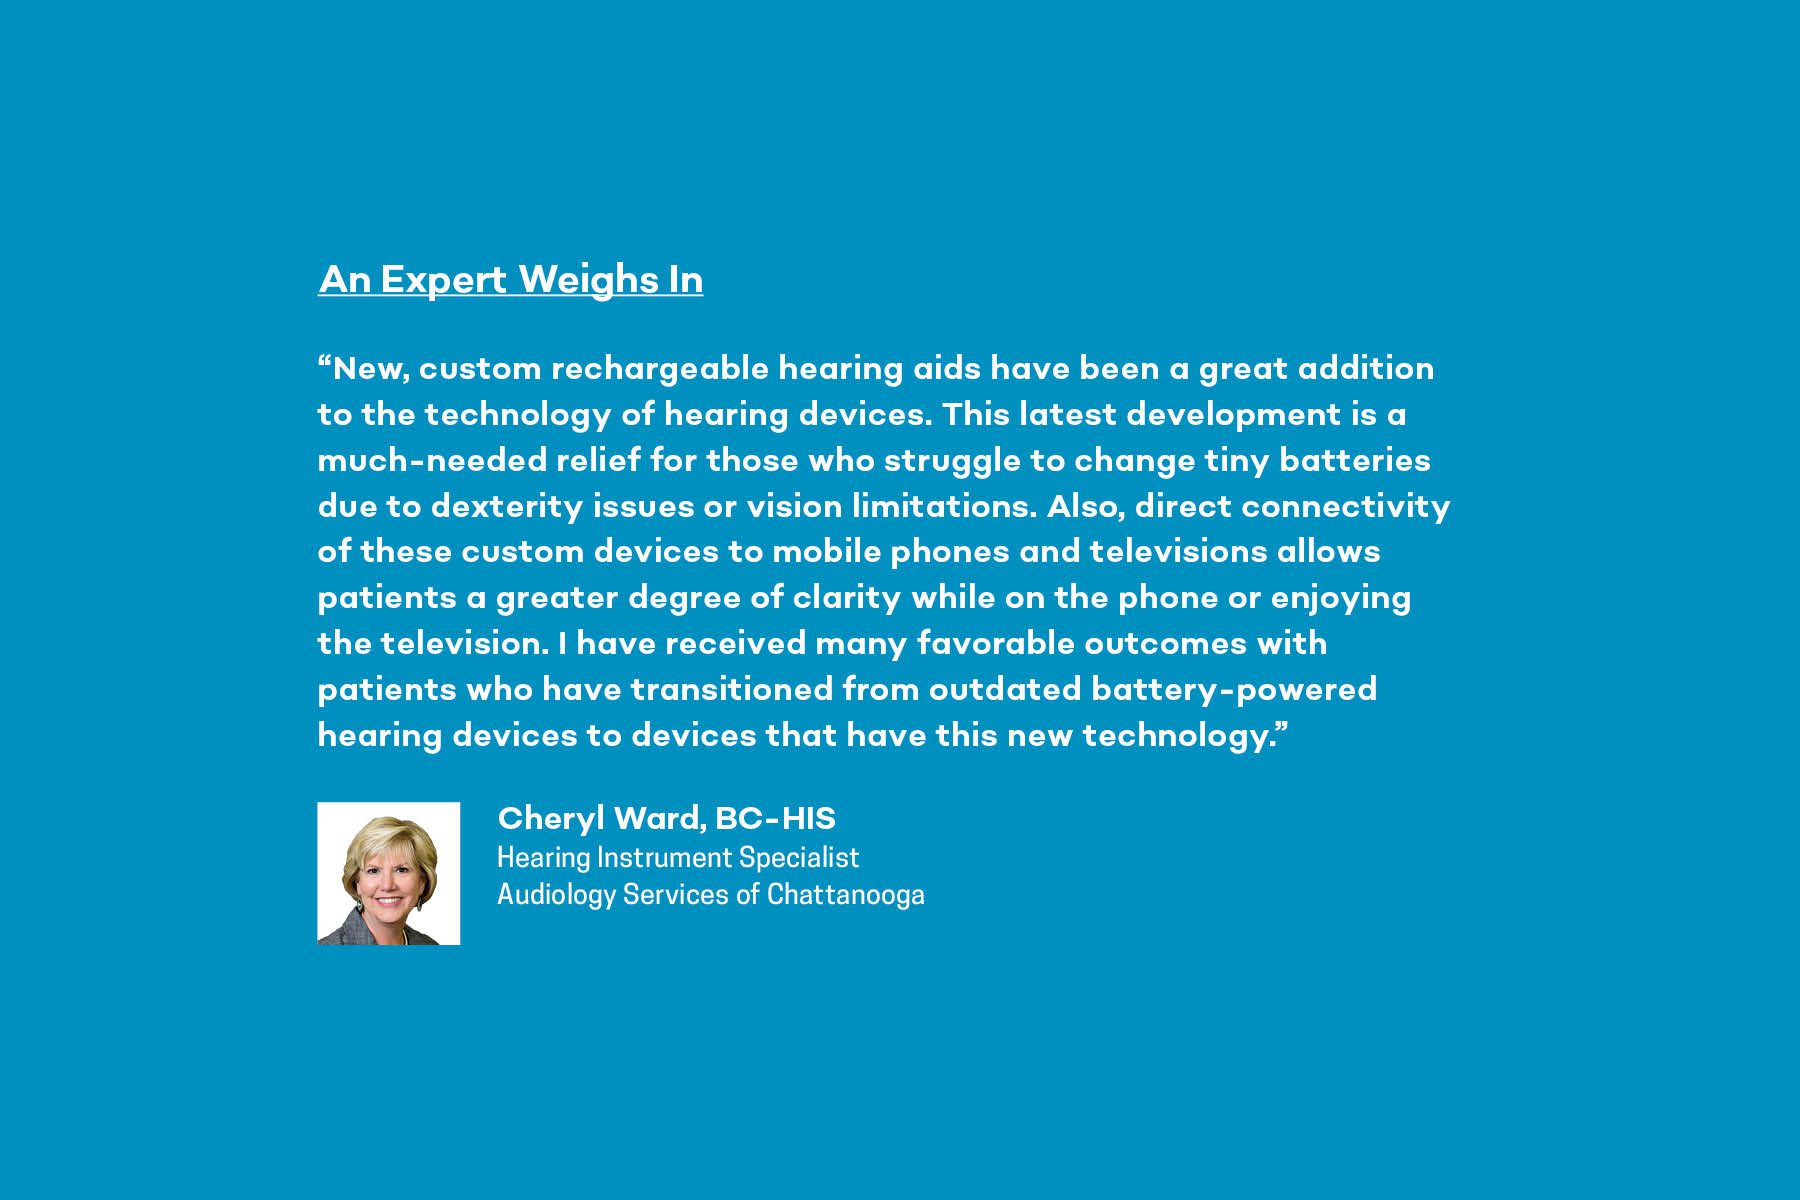 expert opinion on hearing aid technology from Cheryl Ward, BC-HIS